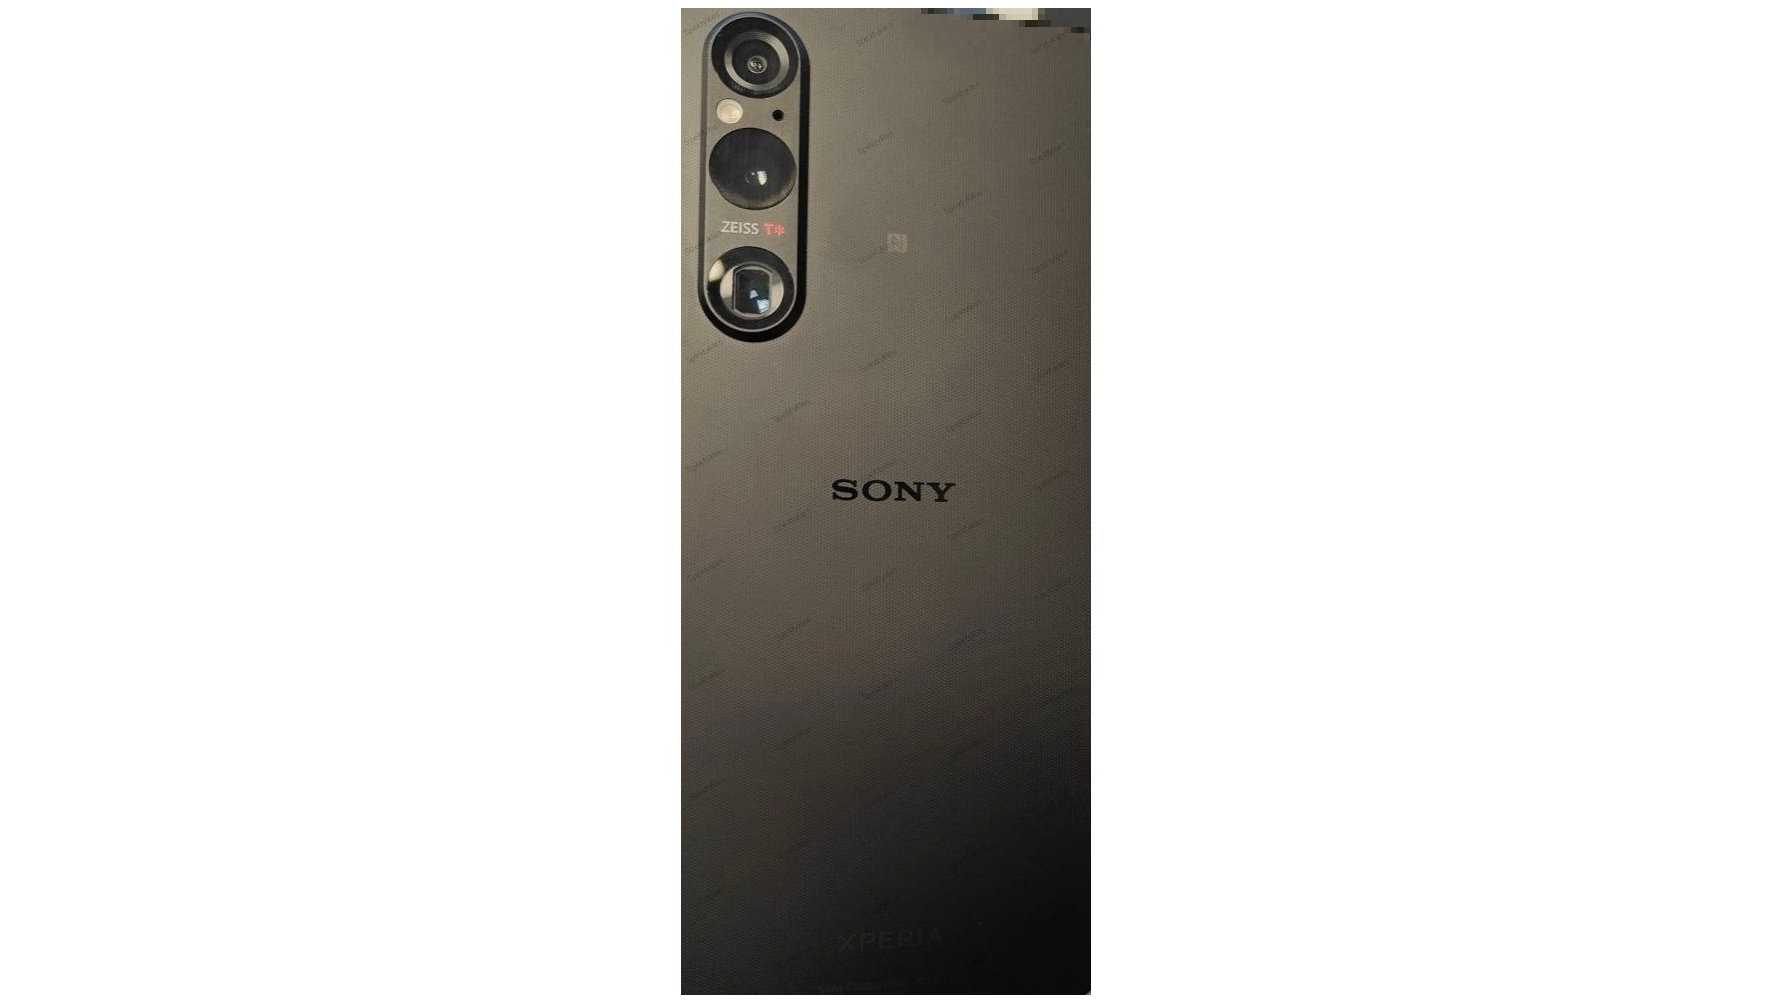 A leaked image reportedly showing the back of the Sony Xperia 1 V